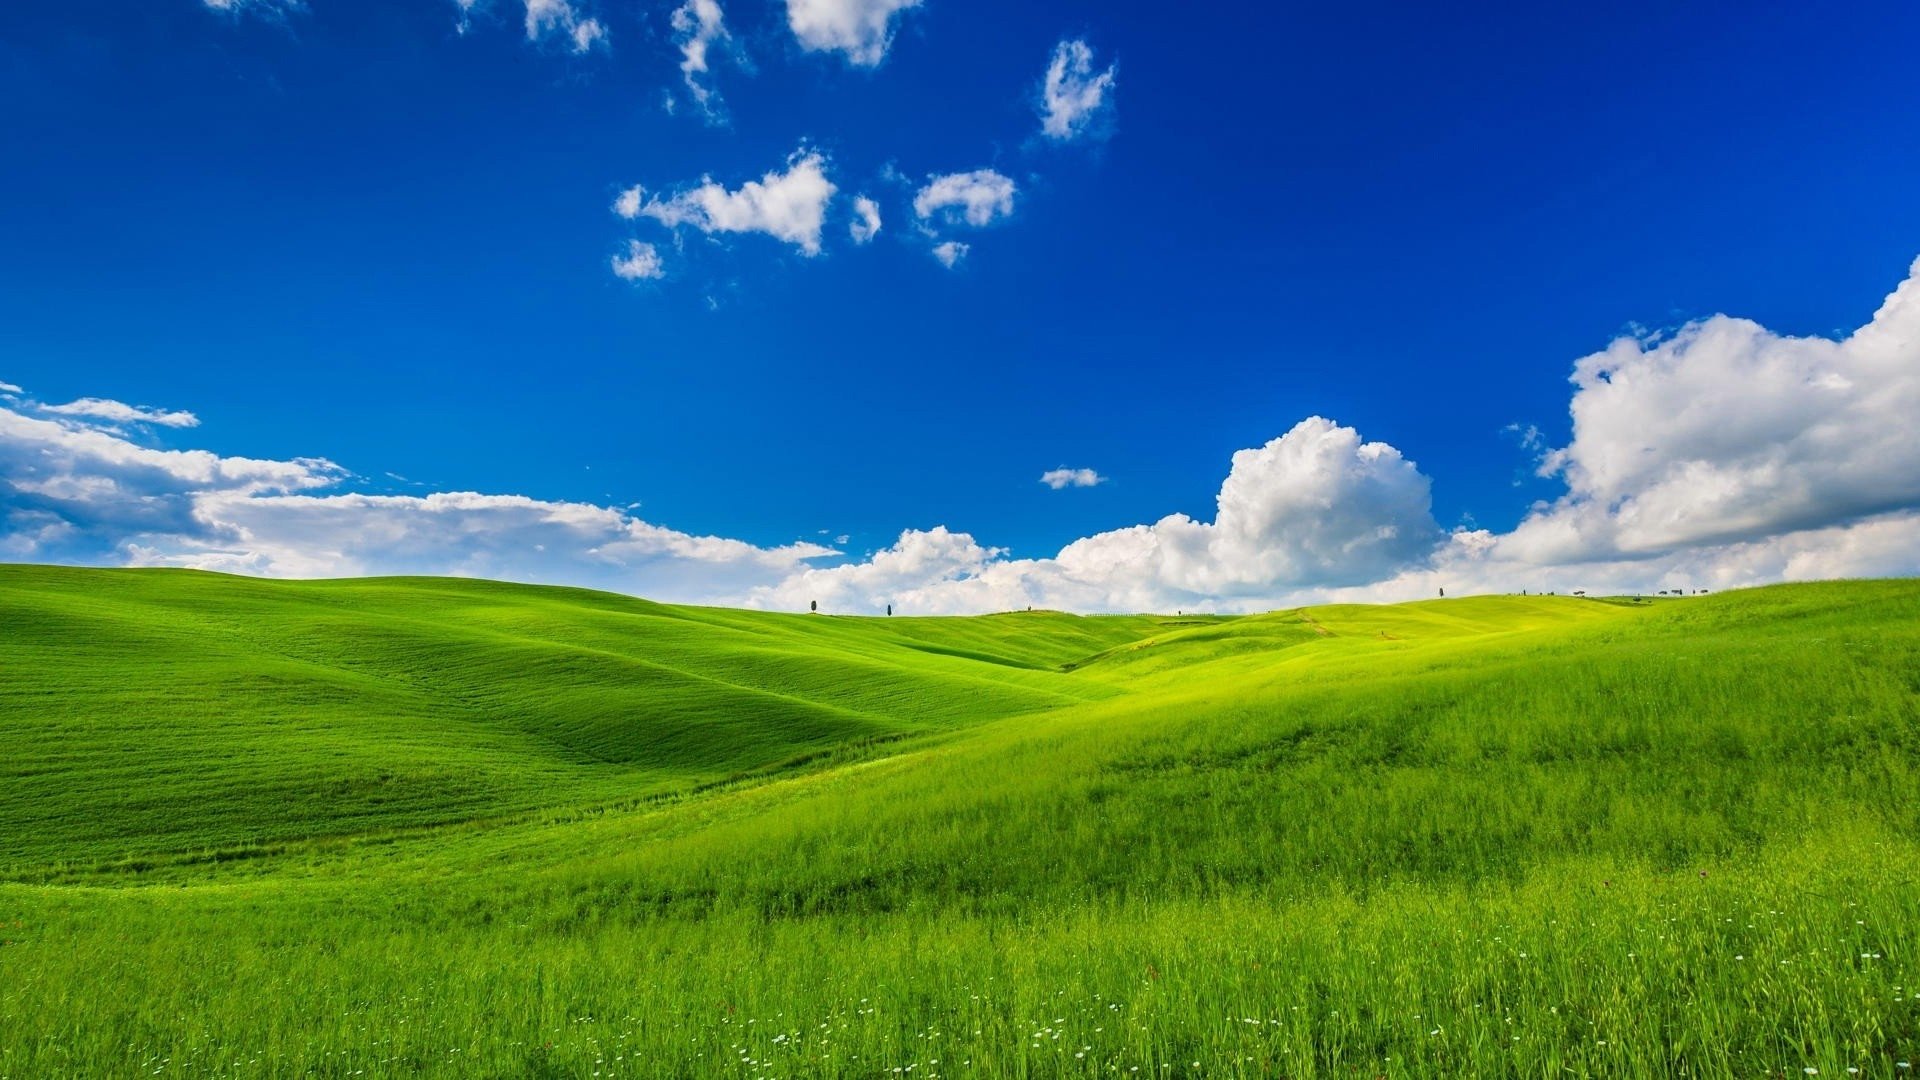 Grass And Sky Wallpapers - Wallpaper Cave